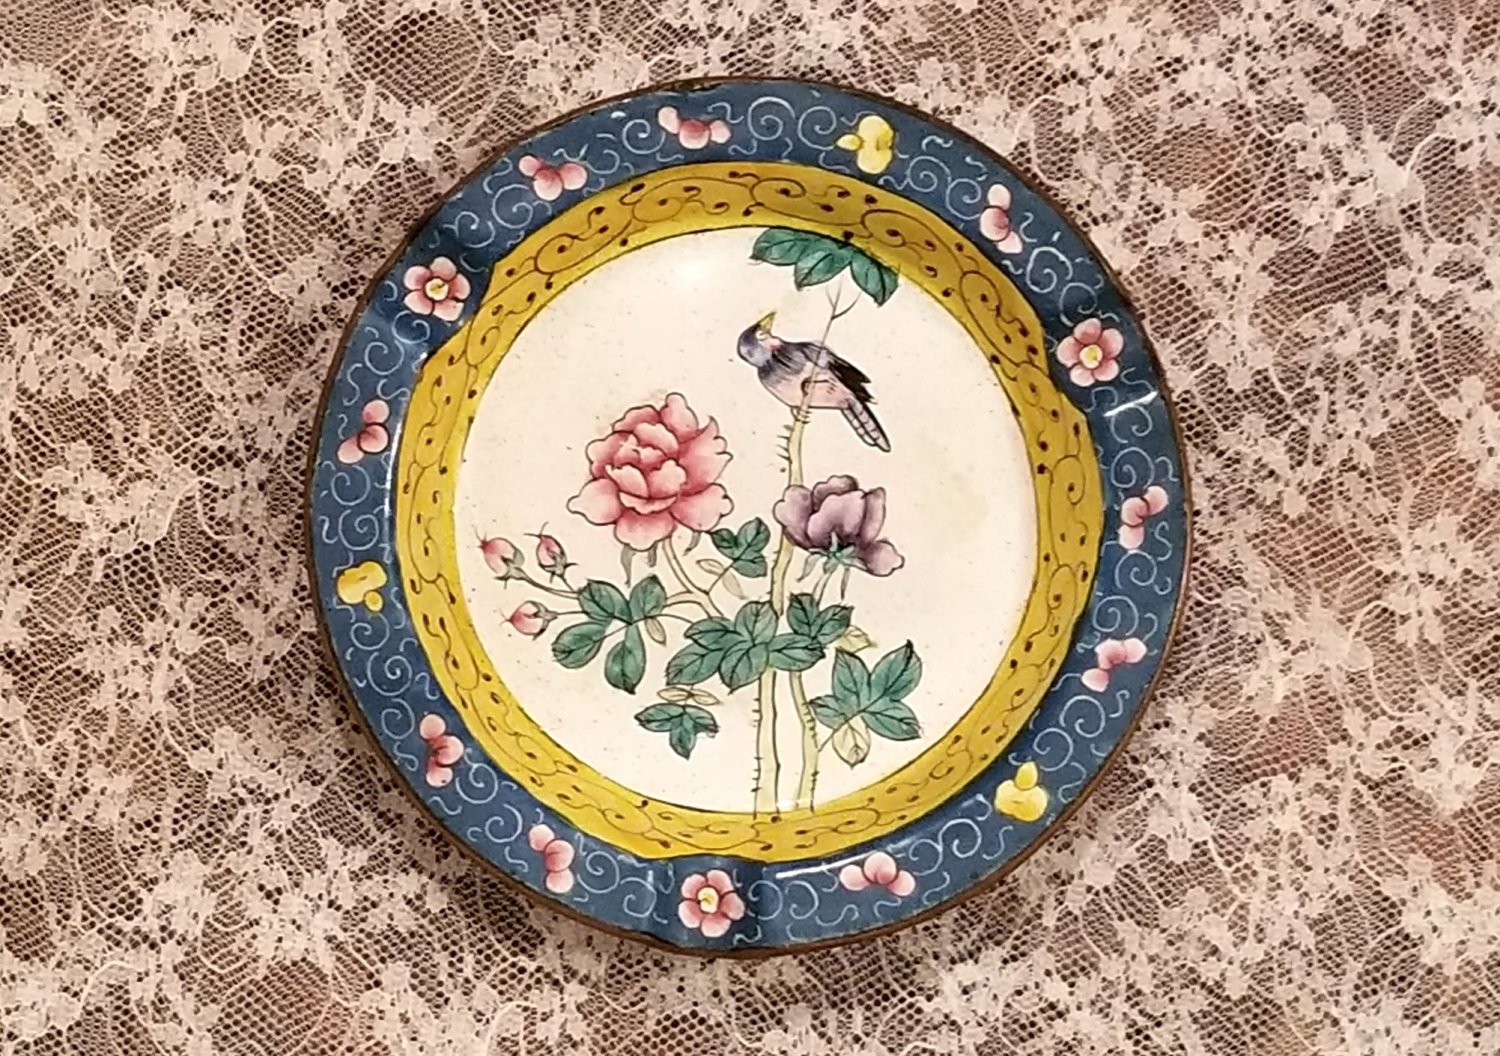 Enameled Asian Dish / Ashtray with Flowers and Bird Theme